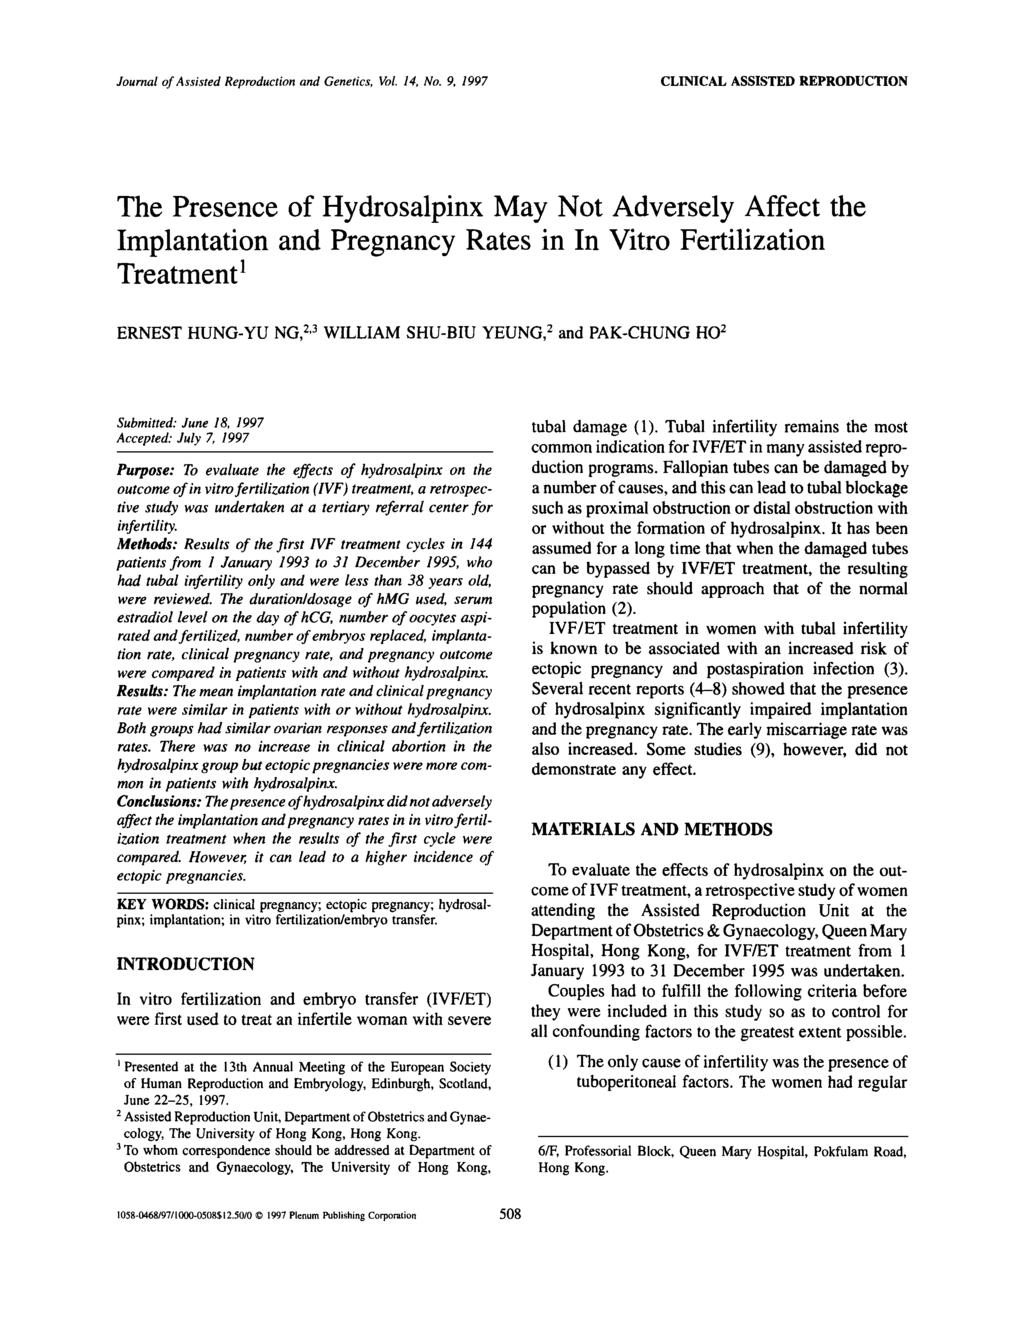 CLINICAL ASSISTED REPRODUCTION The Presence of Hydrosalpinx May Not Adversely Affect the Implantation and Pregnancy Rates in In Vitro Fertilization Treatment1 ERNEST HUNG-YU NG,2,3 WILLIAM SHU-BIU